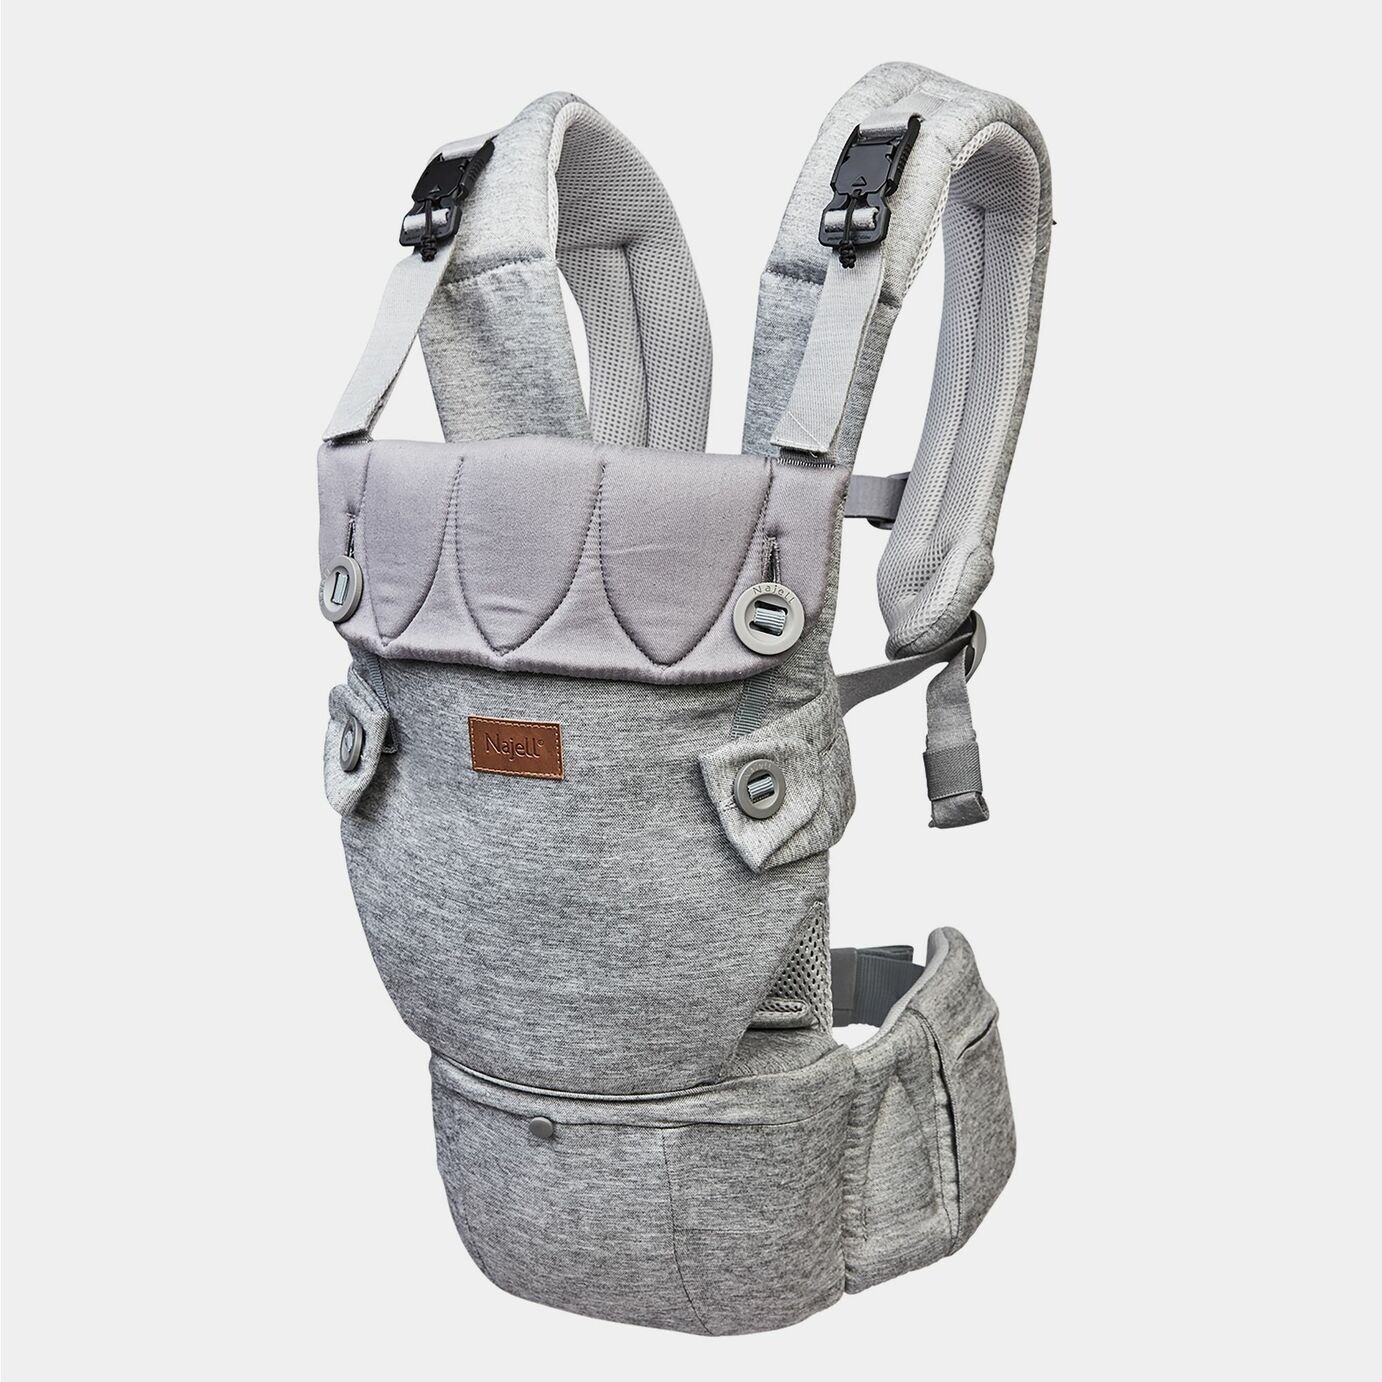 Najell Baby Carrier Review